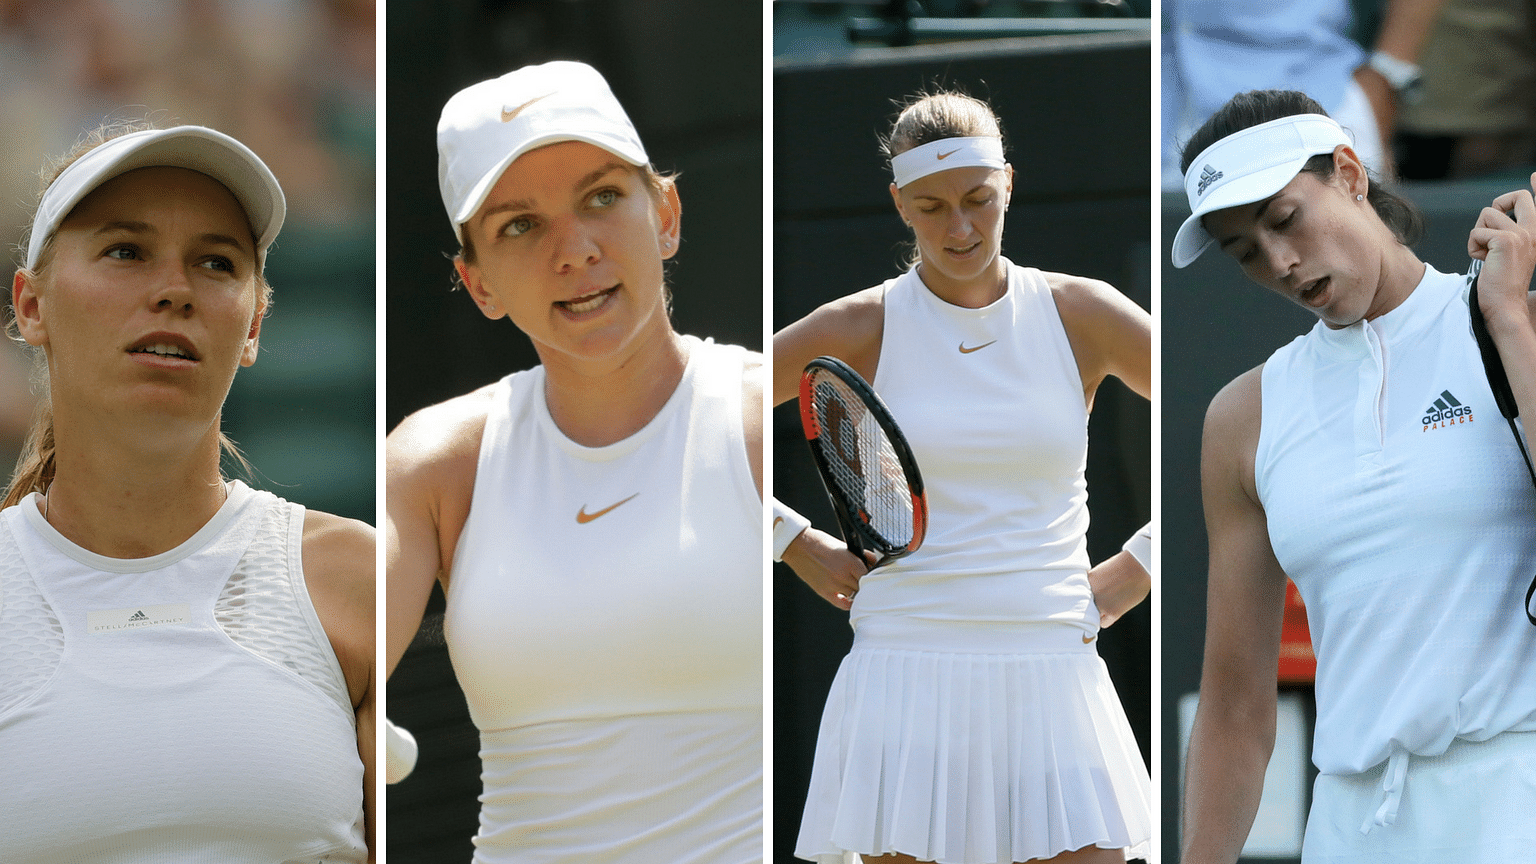 The top 10 seeded players in the women’s draw have been knocked out of Wimbledon 2018.